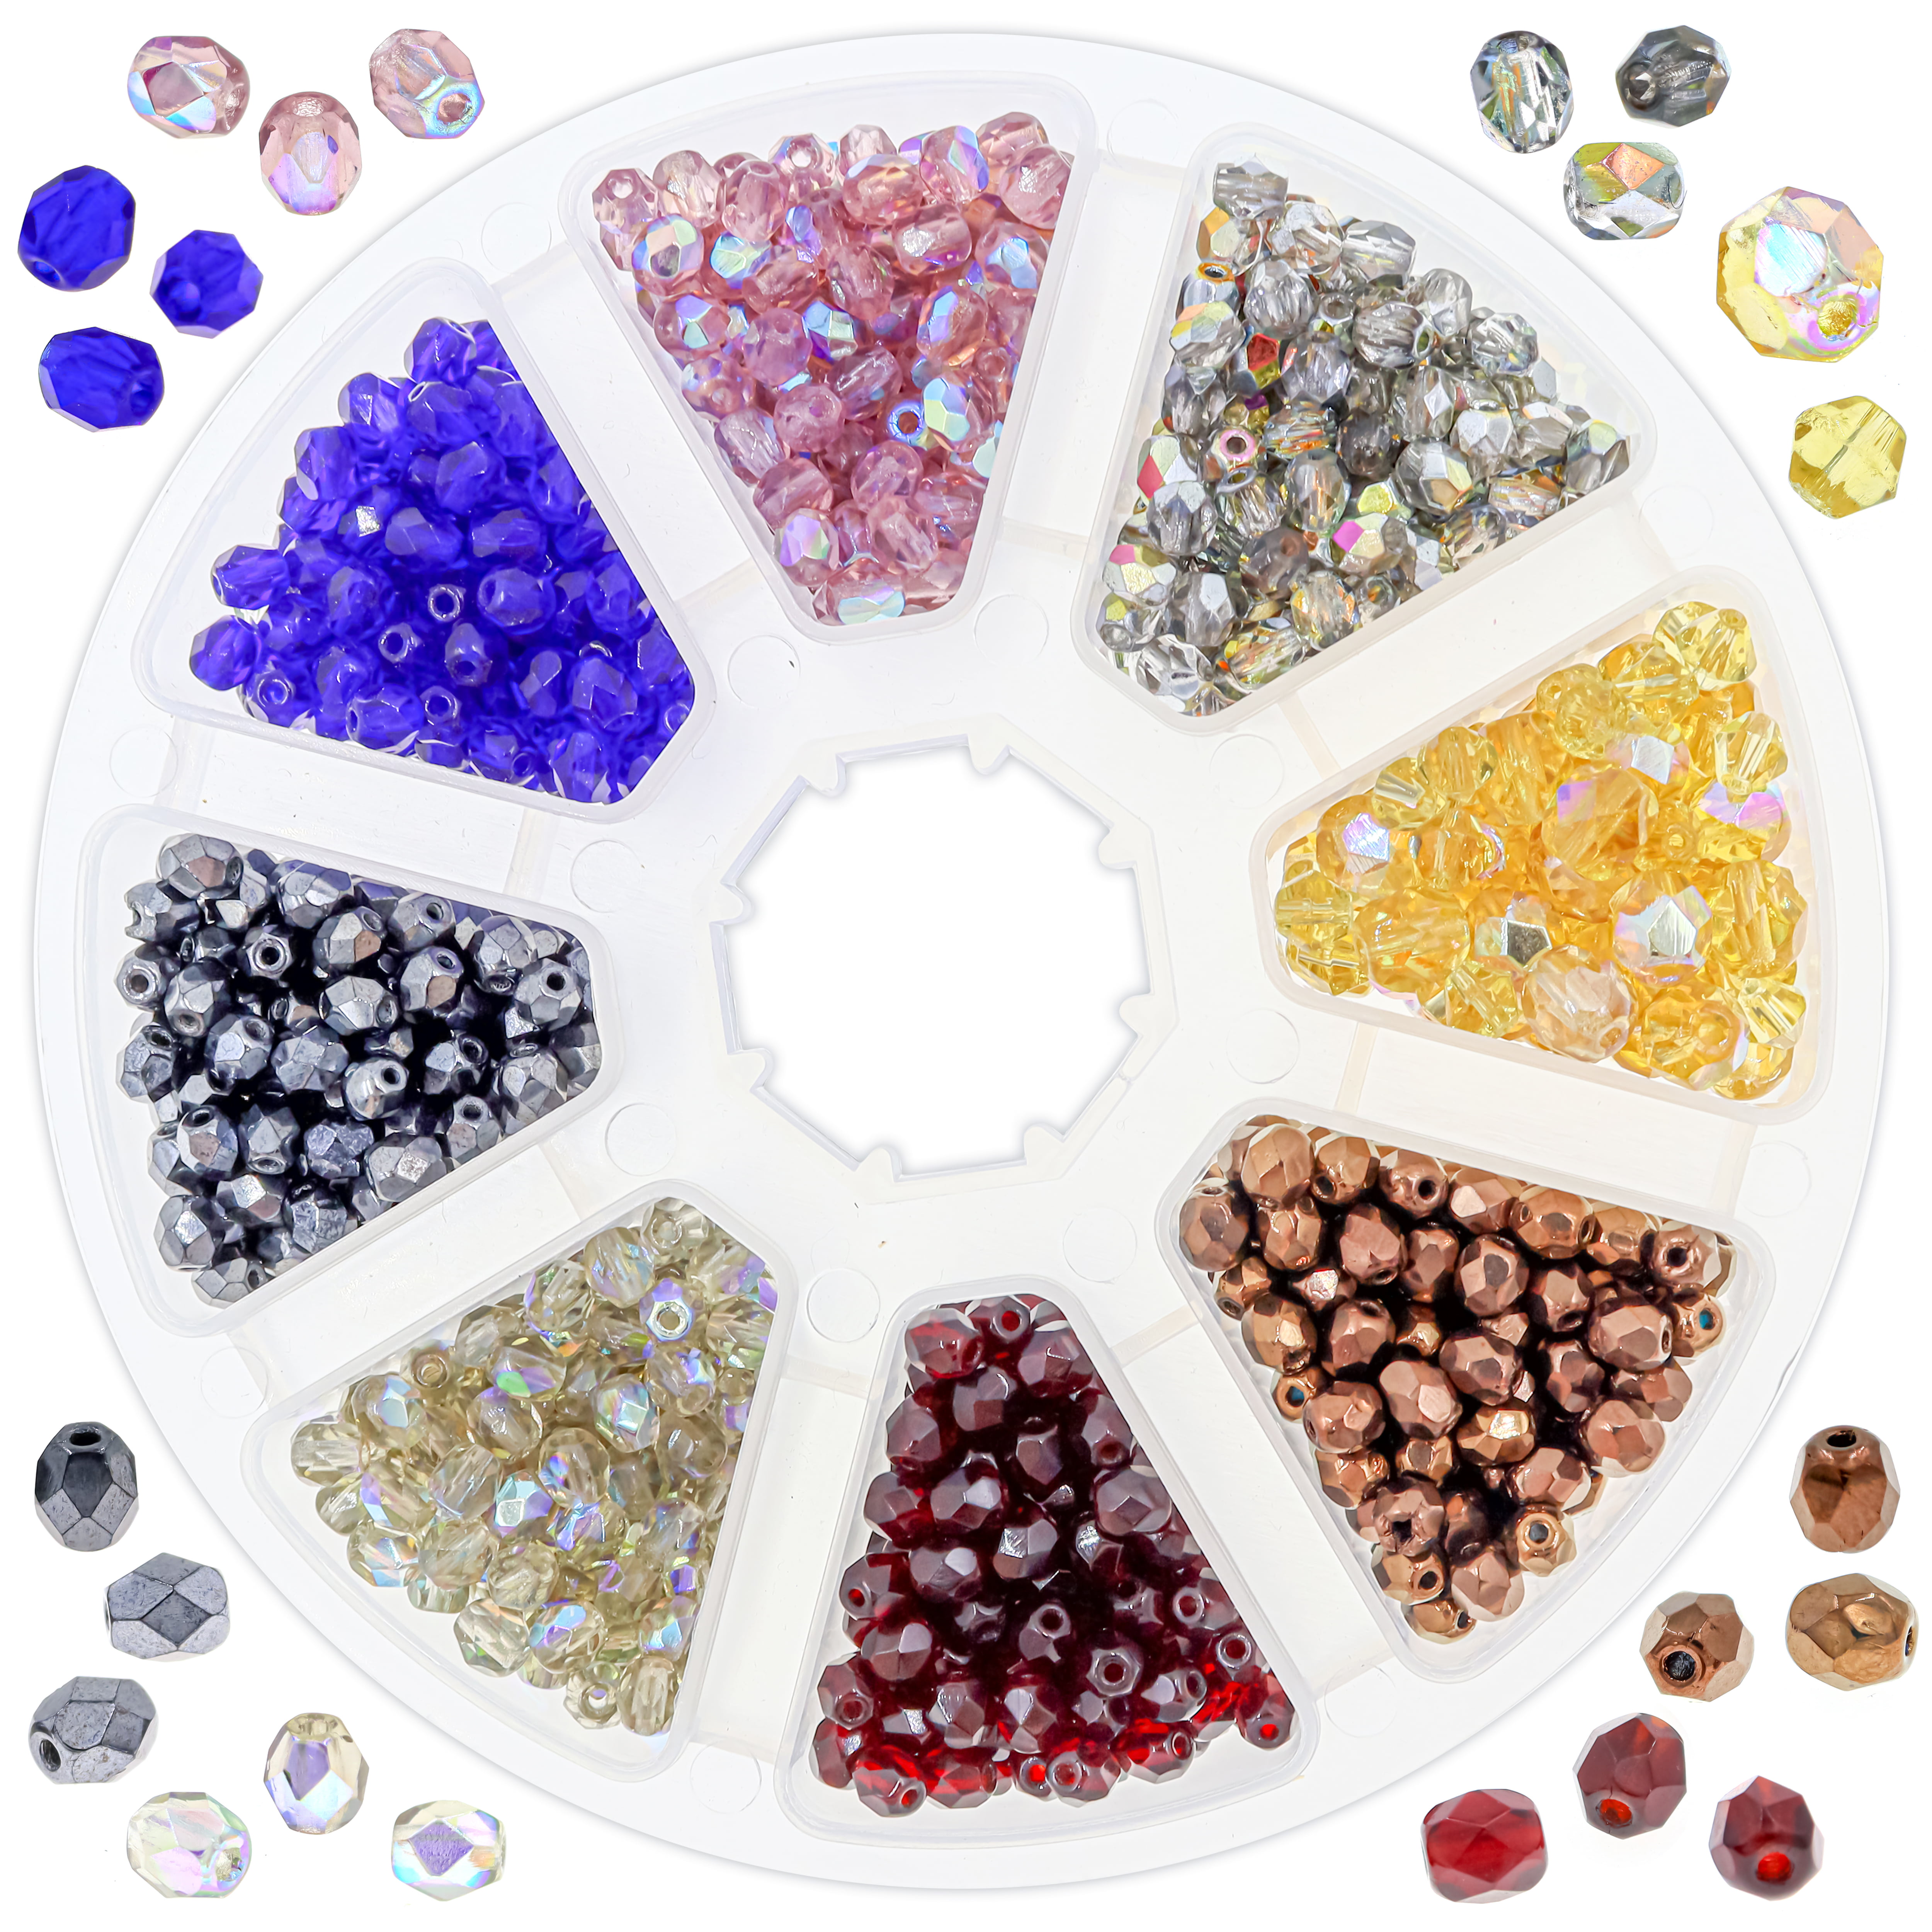 1000pcs/2/3/4mm Czech Glass Beads Seed Jewelry Spacer Loose Round Making Lot